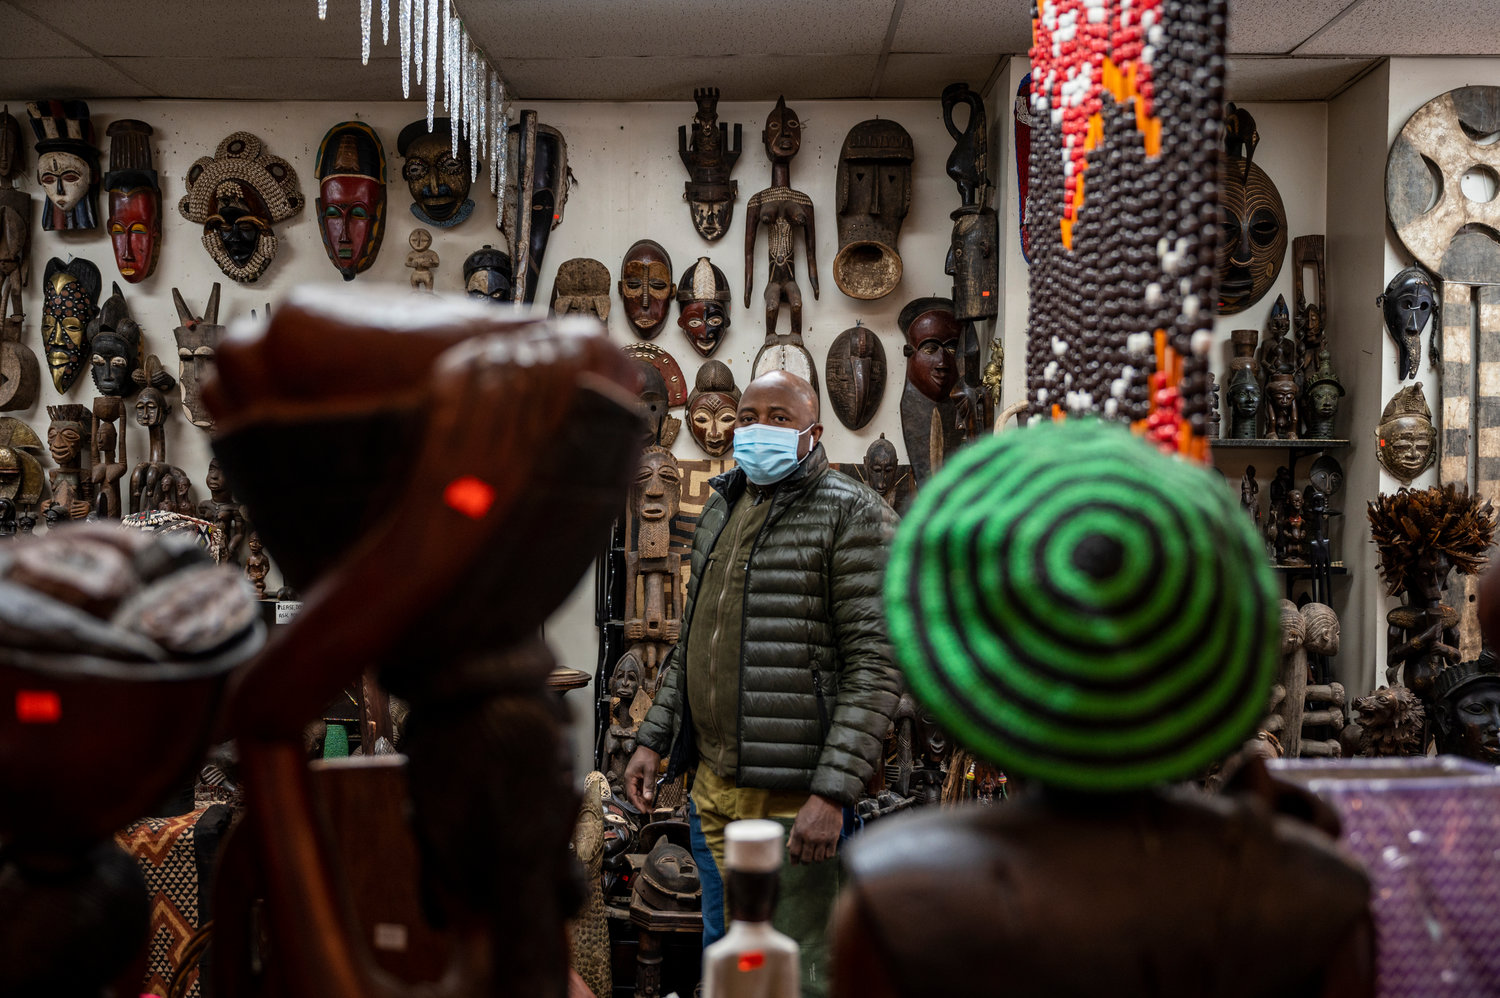 Cheick Conde has owned African Masidi and Co., a pan-African art store in Kingsbridge, for more than 25 years. Things haven’t been easy during the coronavirus pandemic, however. The store closed for five months, and now foot traffic is down significantly from more normal times.